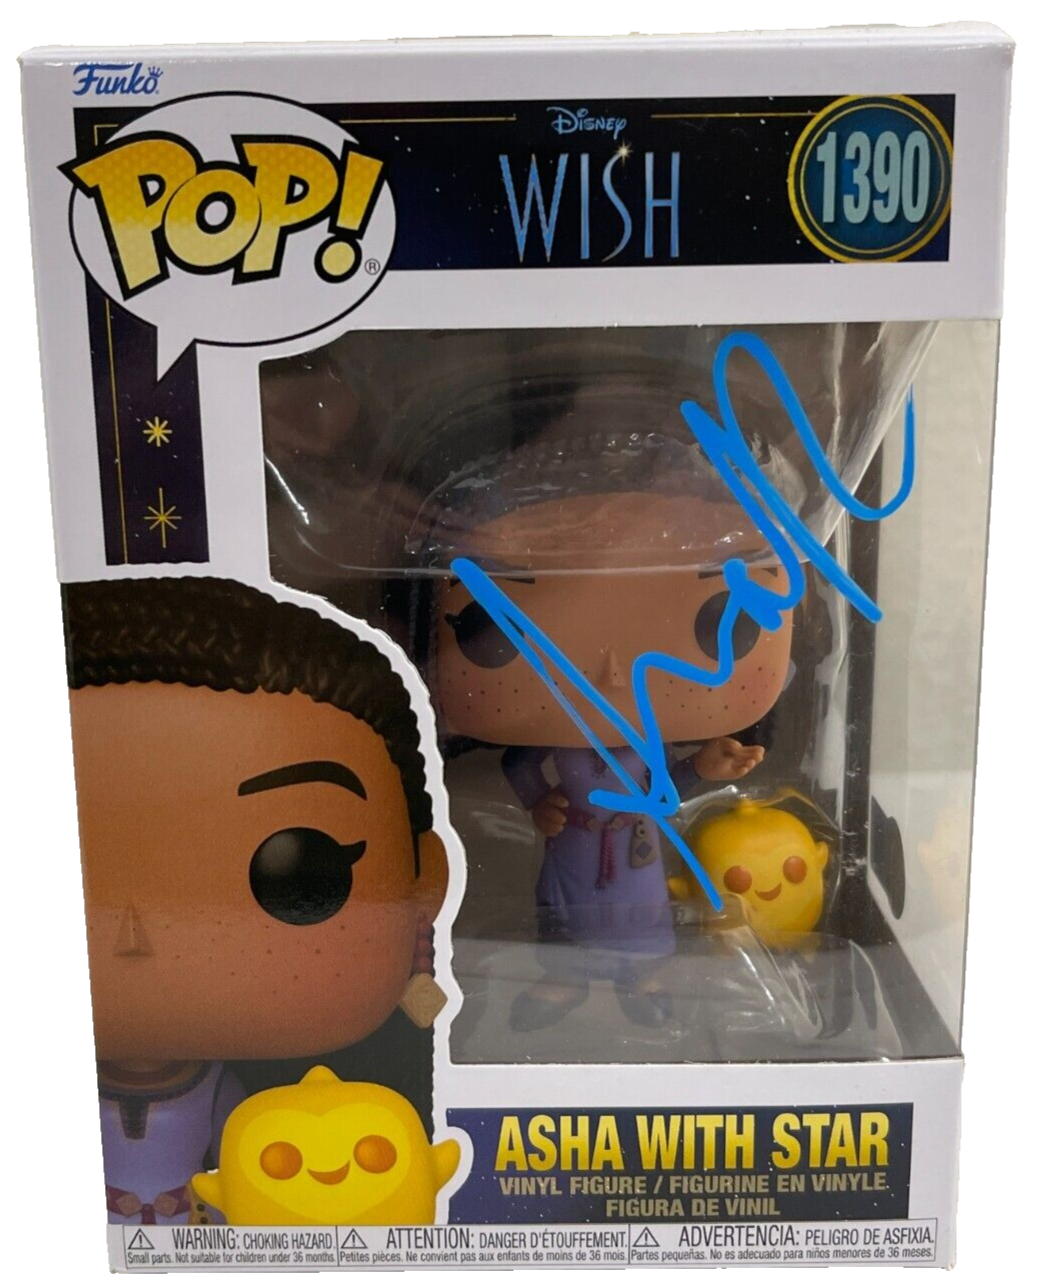 Ariana Debose Authentic Autographed Asha with Star Wish 1390 Funko Pop